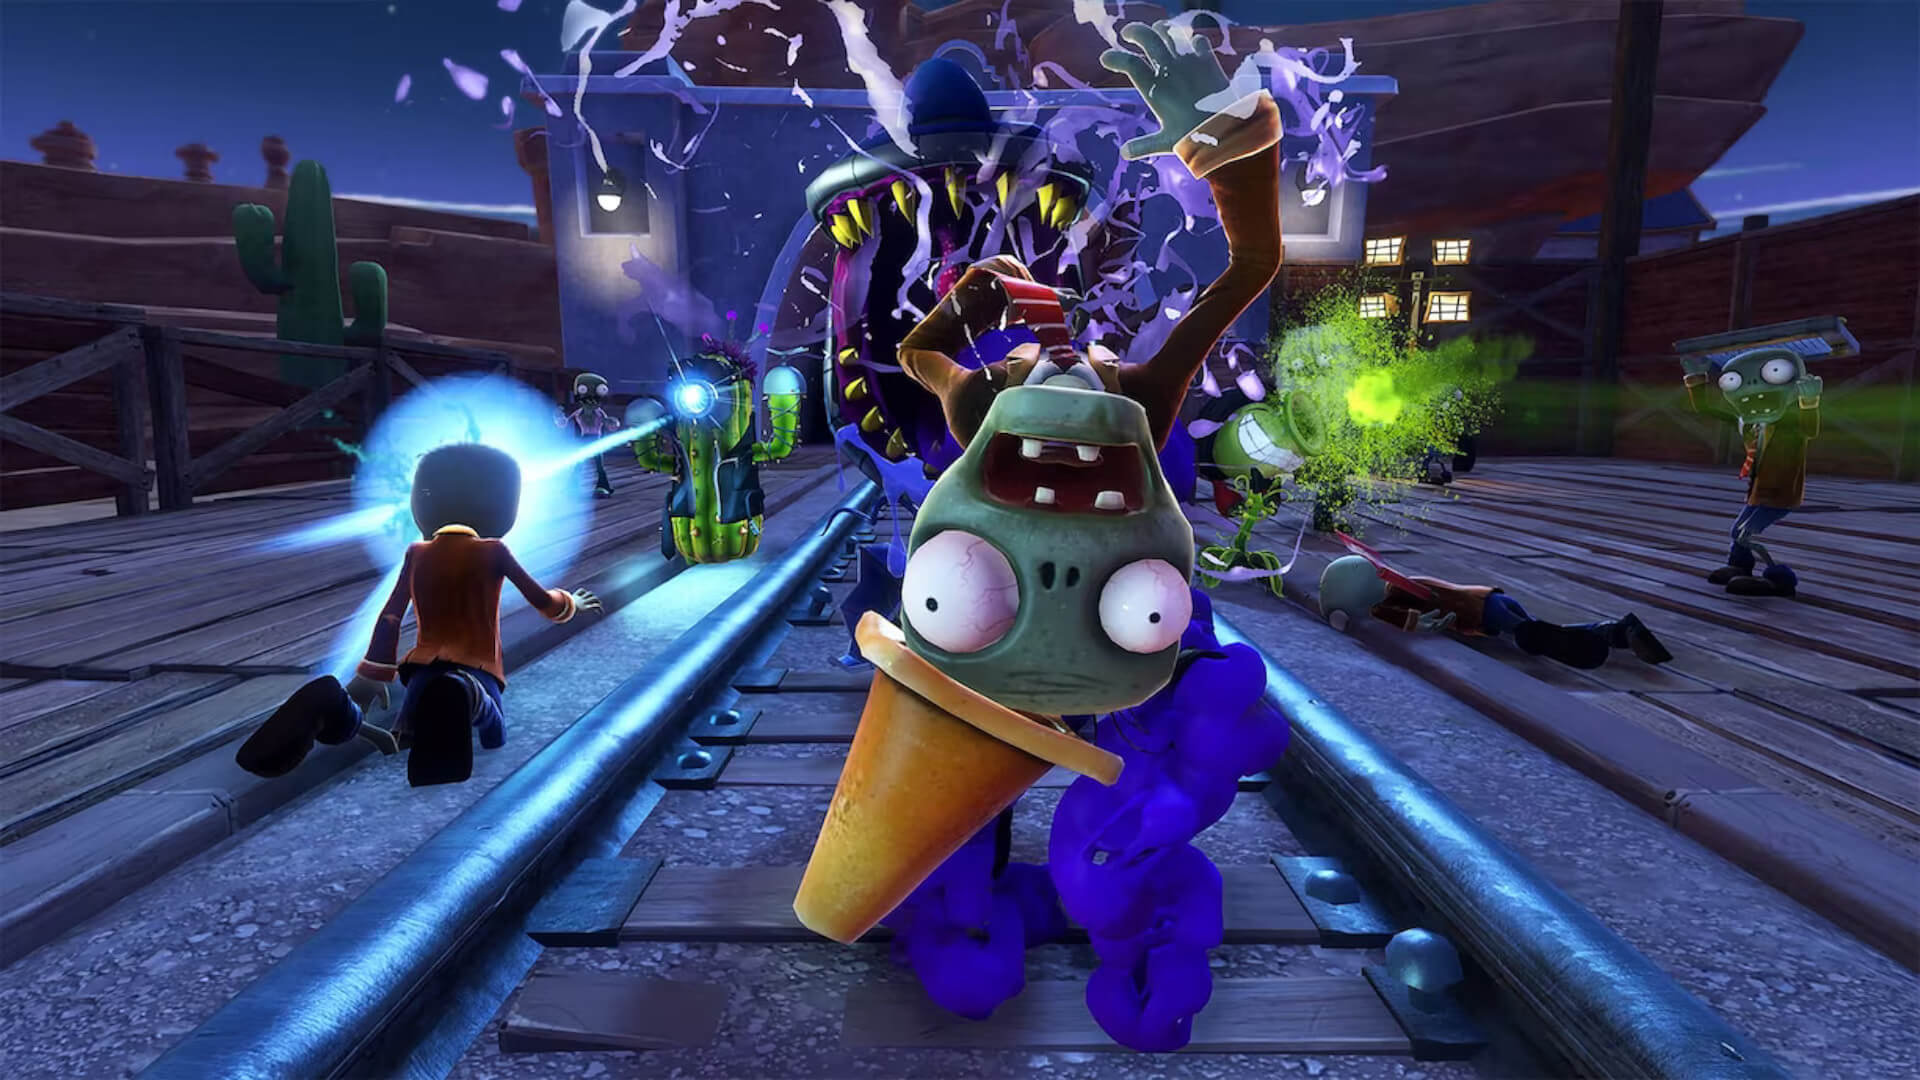 Zombies being attacked by carnivorous plants in Plants vs. Zombies: Garden Warfare